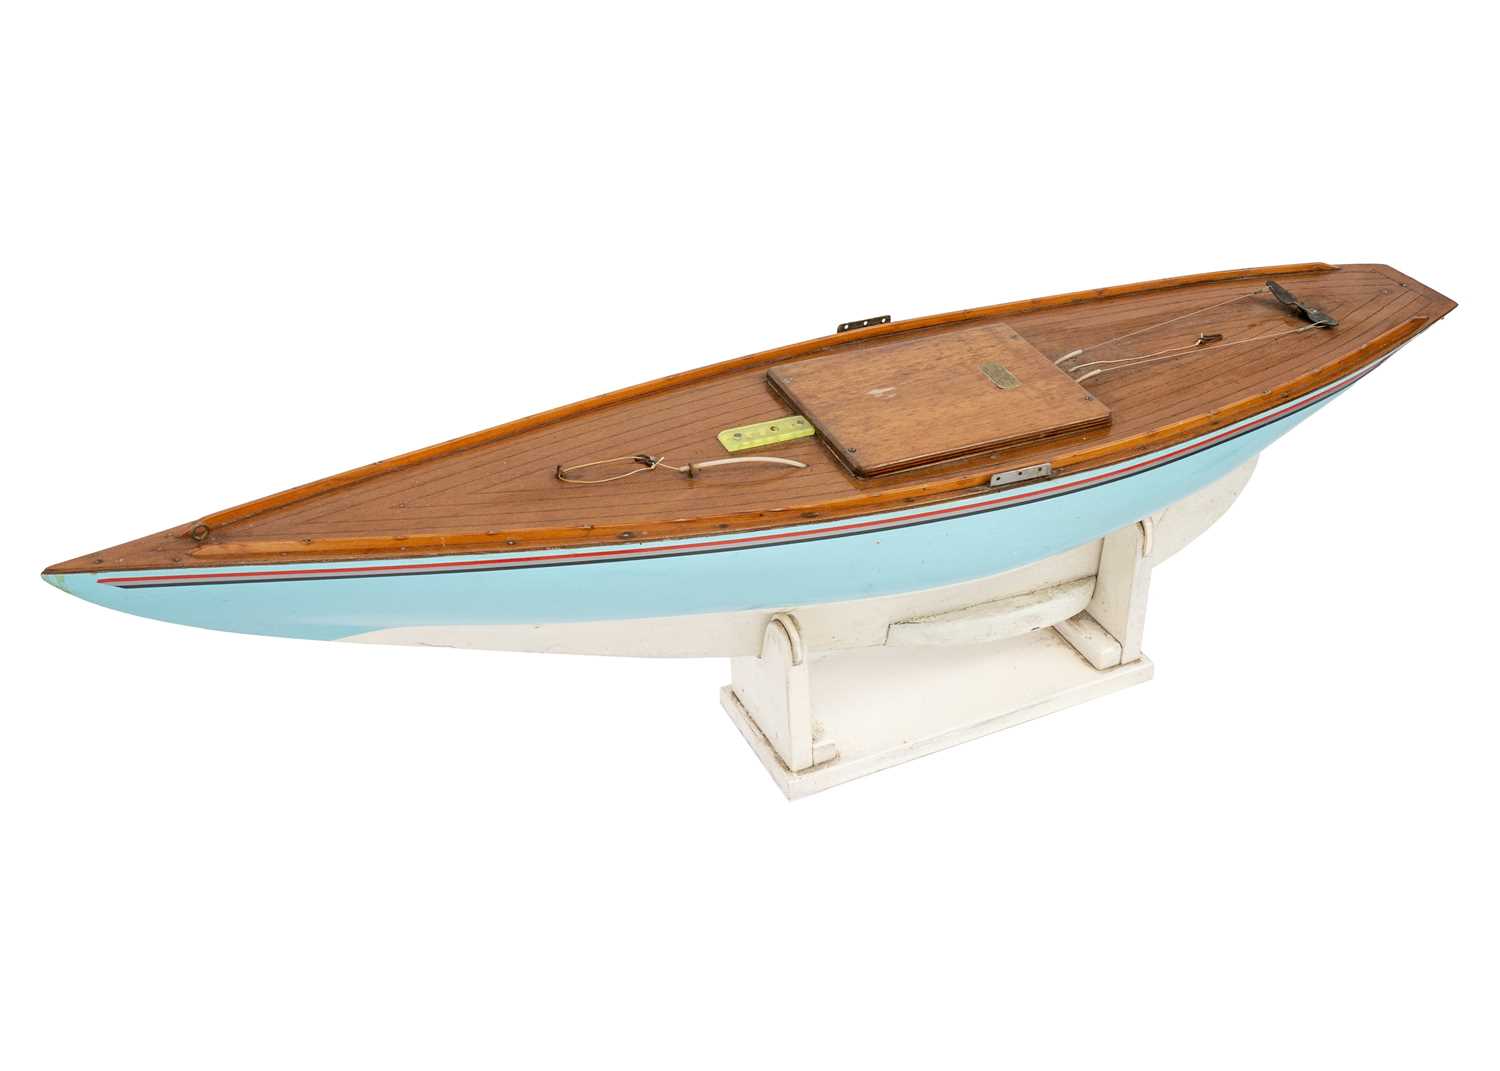 A 3ft 9" pond yacht by Reg Phillips of St Mary's Isles of Scilly. - Image 2 of 2